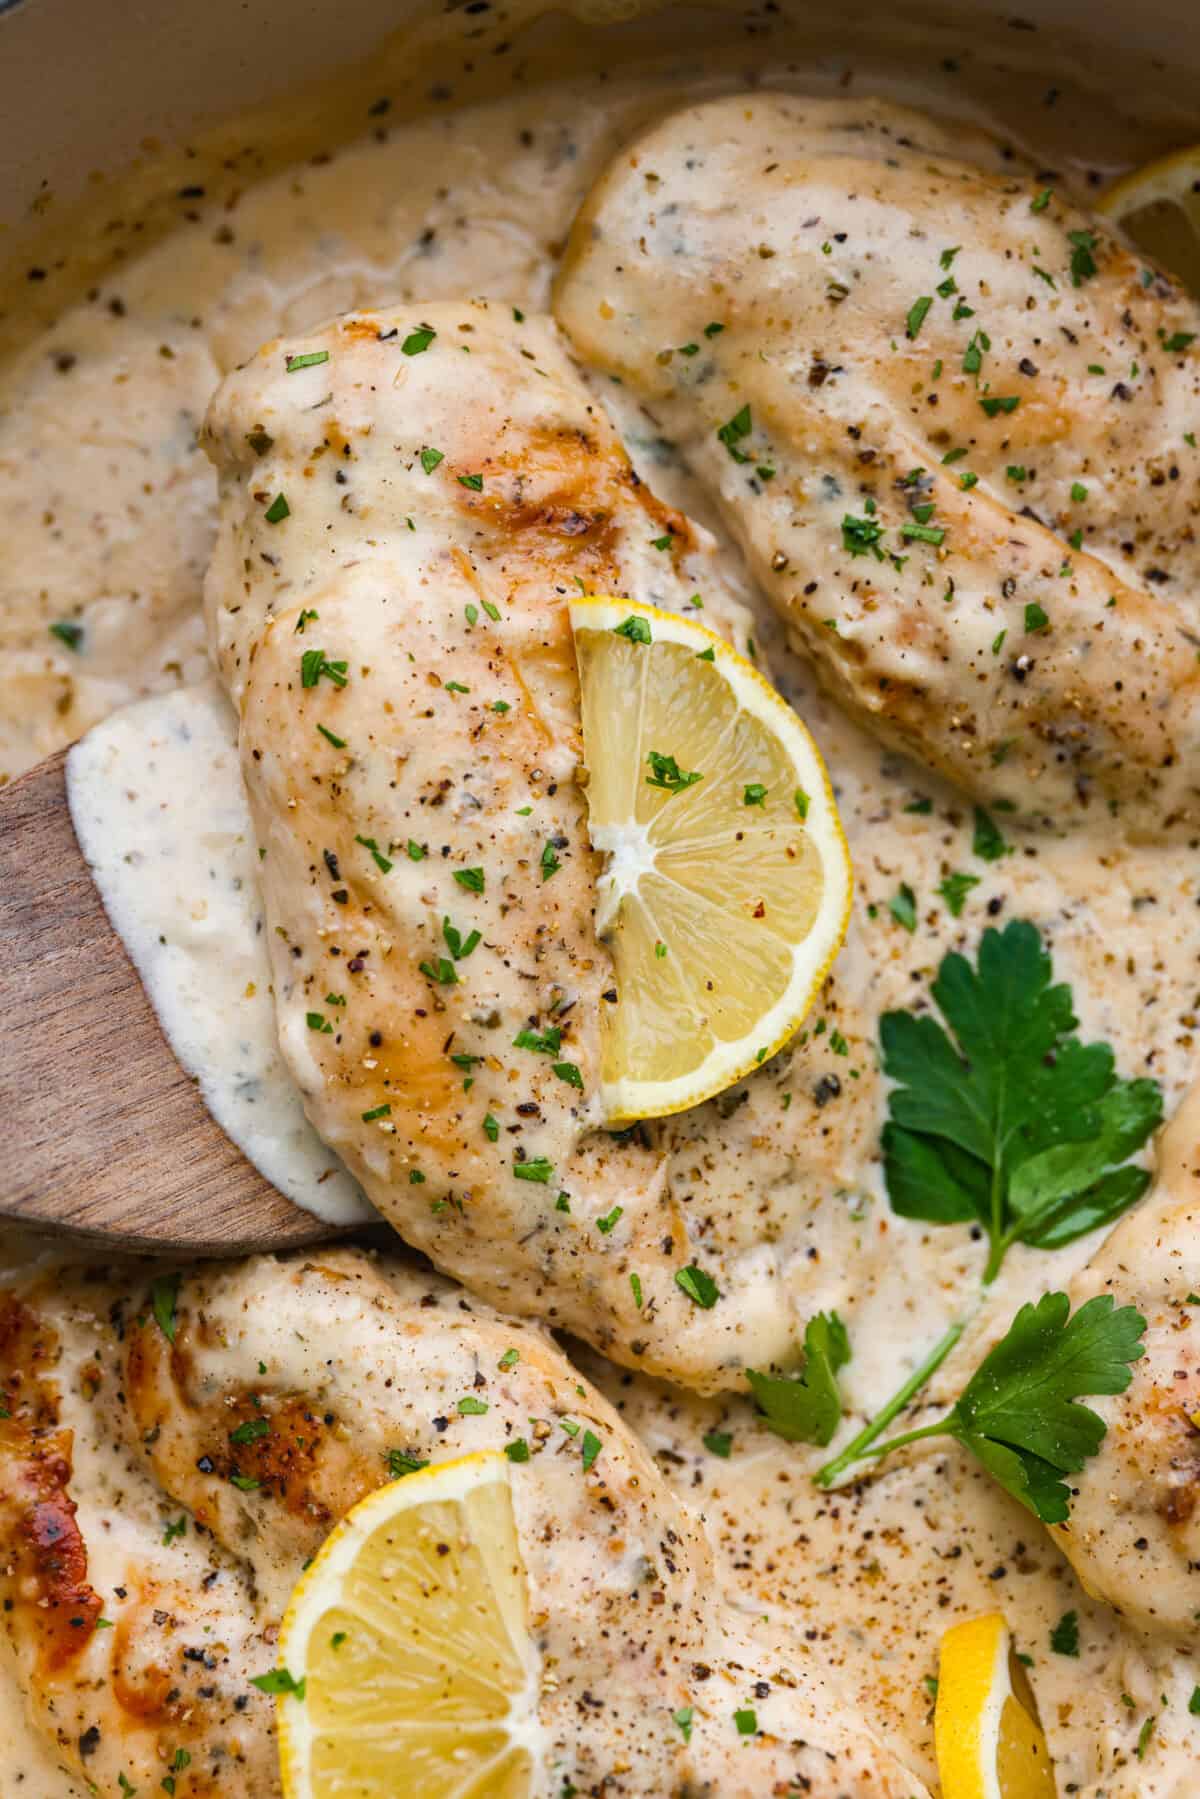 Closeup of a chicken breast coated in the creamy lemon sauce being lifted out of the pan with a wooden spatula. - Creamy Lemon Parmesan Chicken